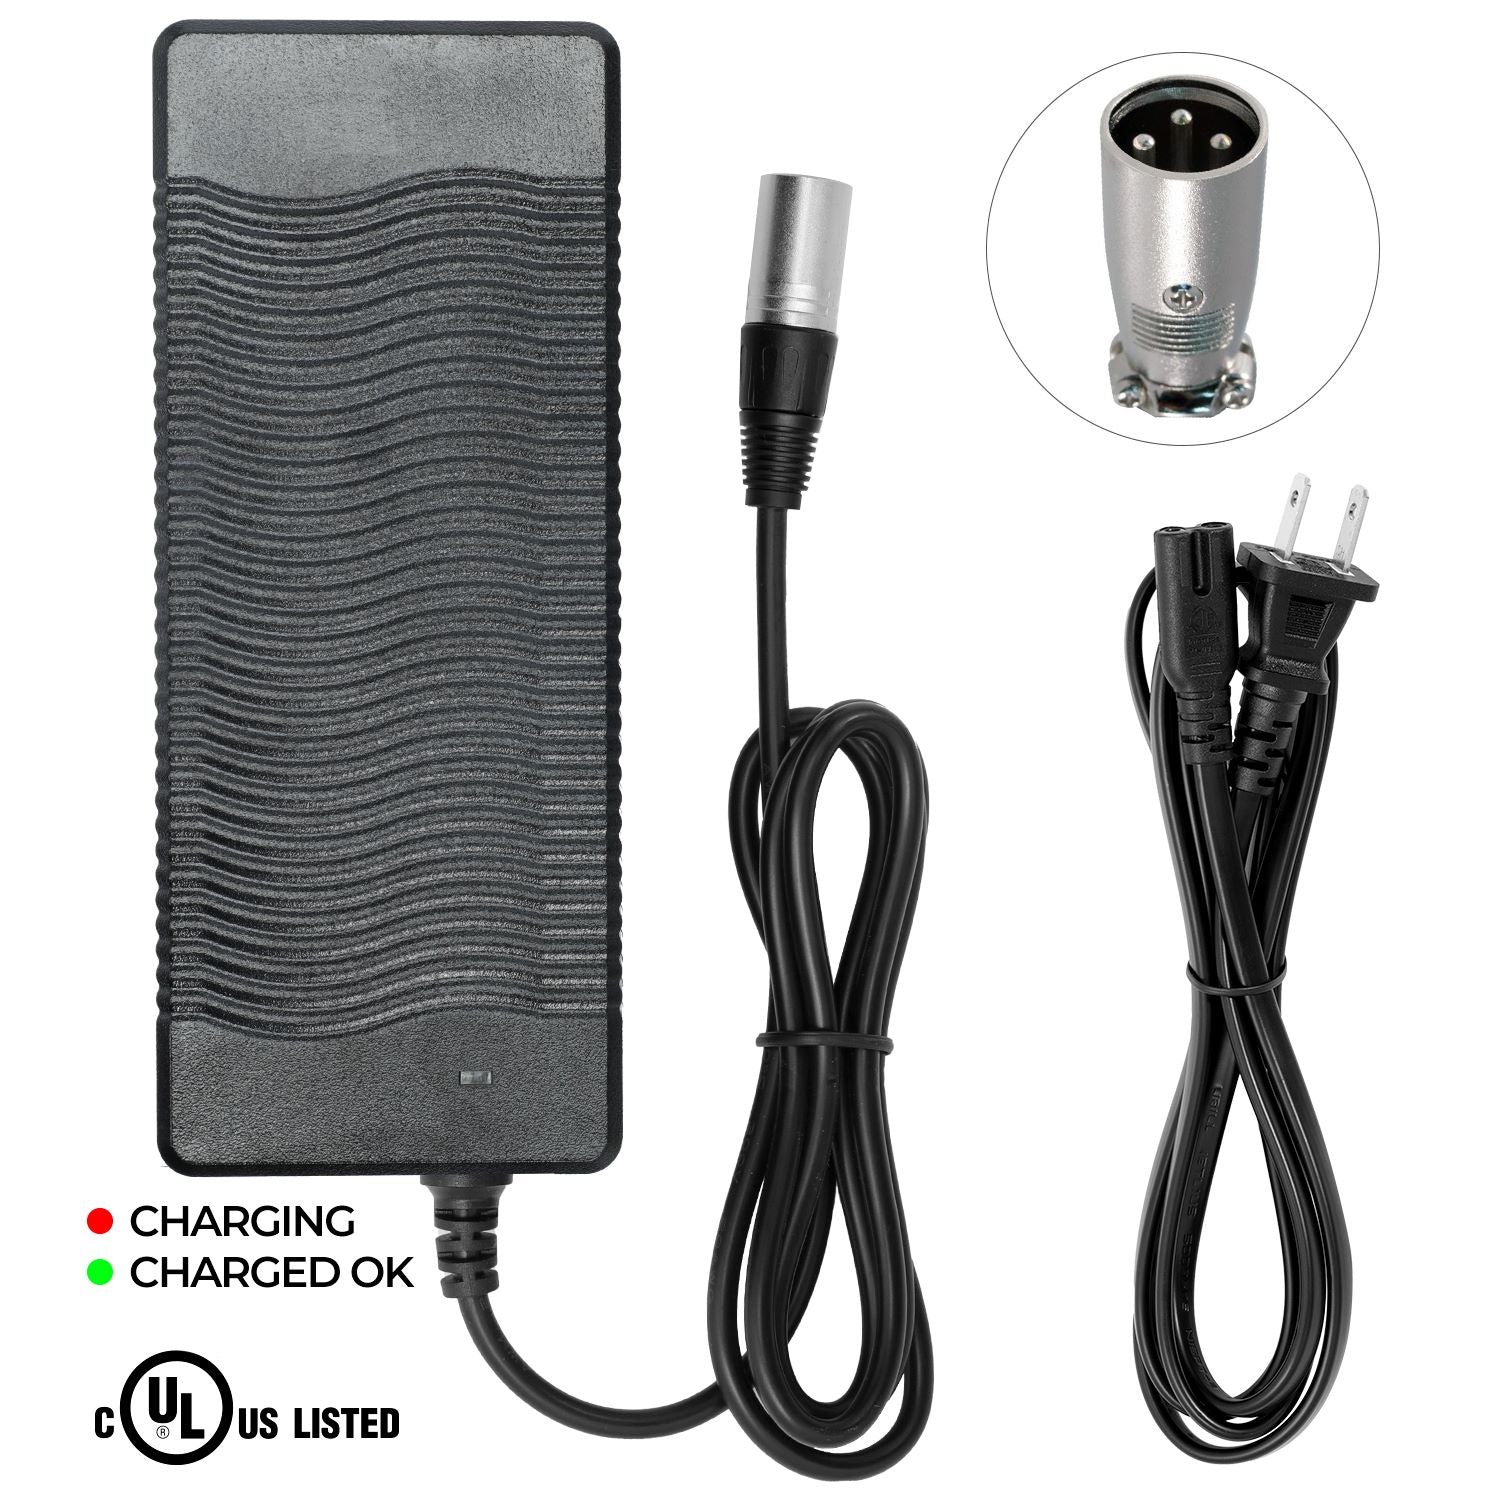 UL Listed Charger for Pedego Boomerang eBike (NOT for Other Pedego Models,Please Check the DC Shape Carefully)